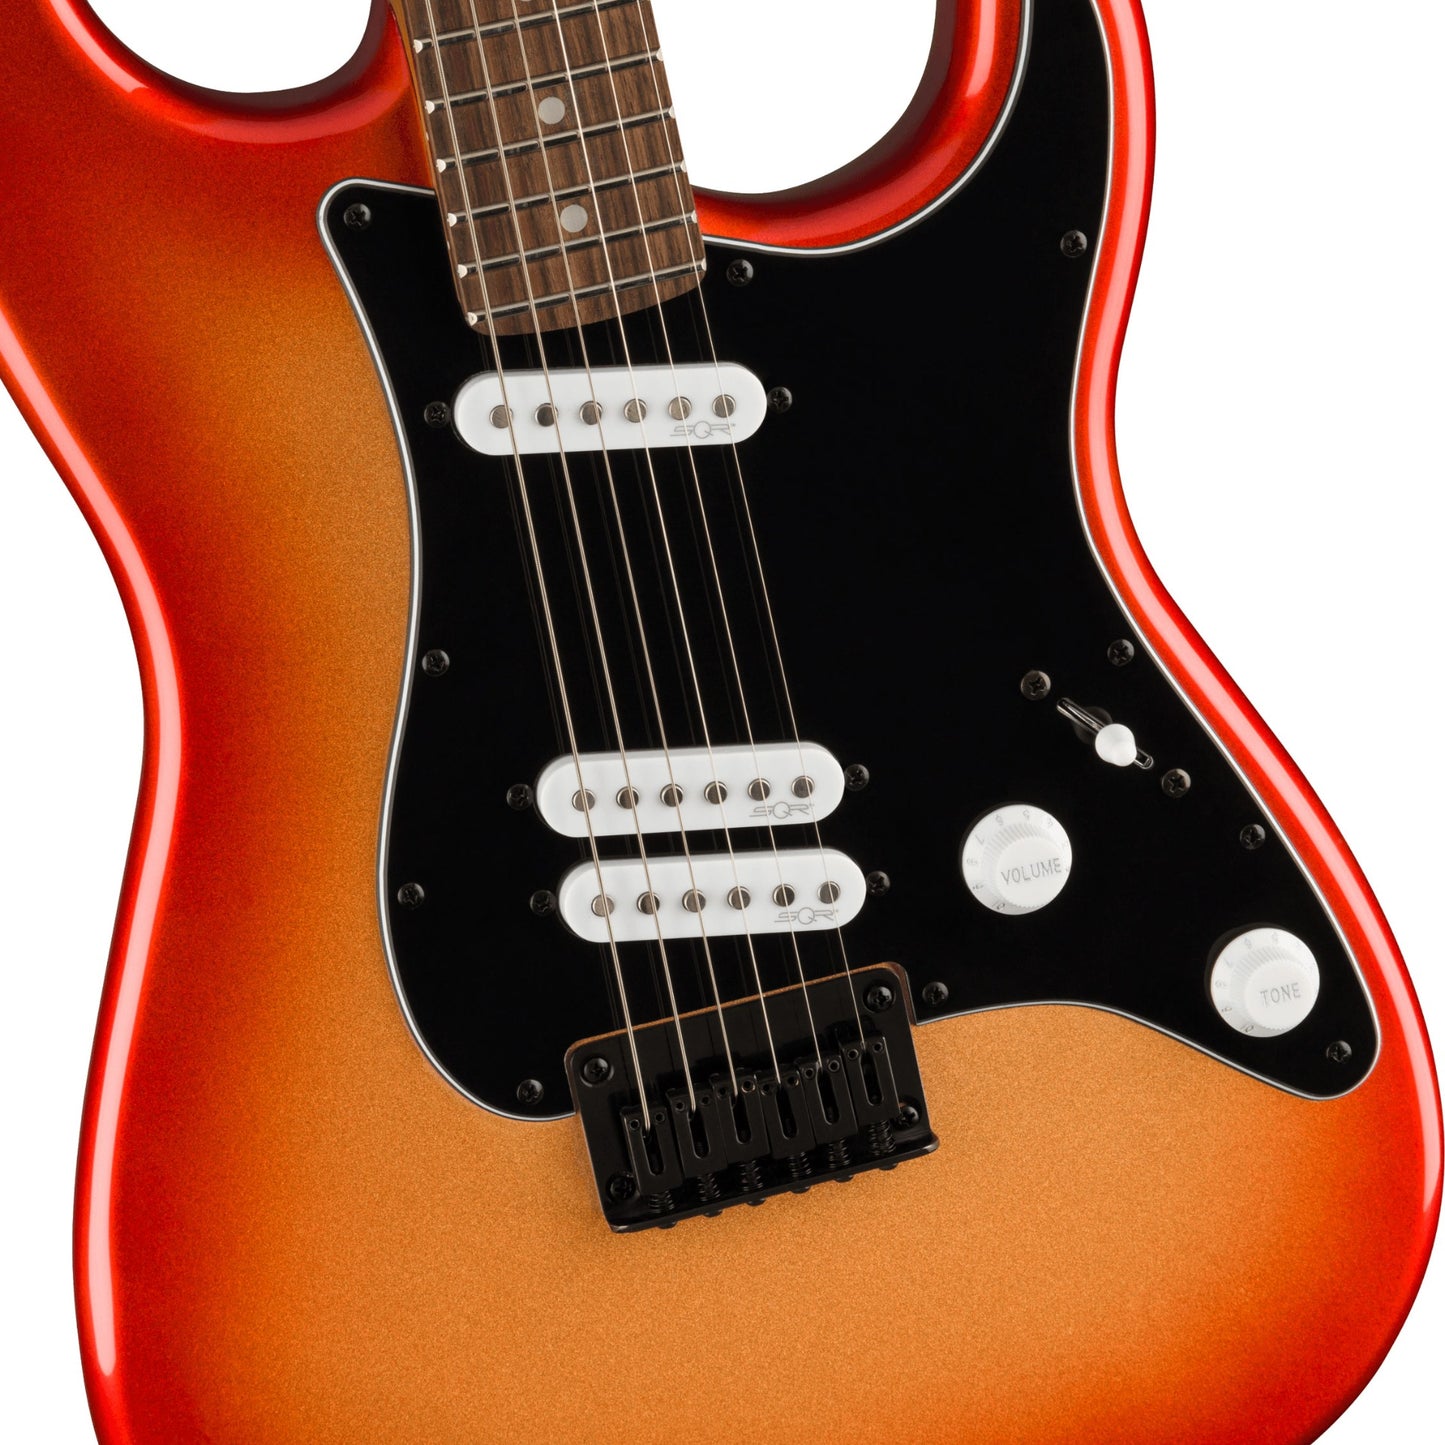 Squier Contemporary Stratocaster Special HT Electric Guitar, Sunset Metallic